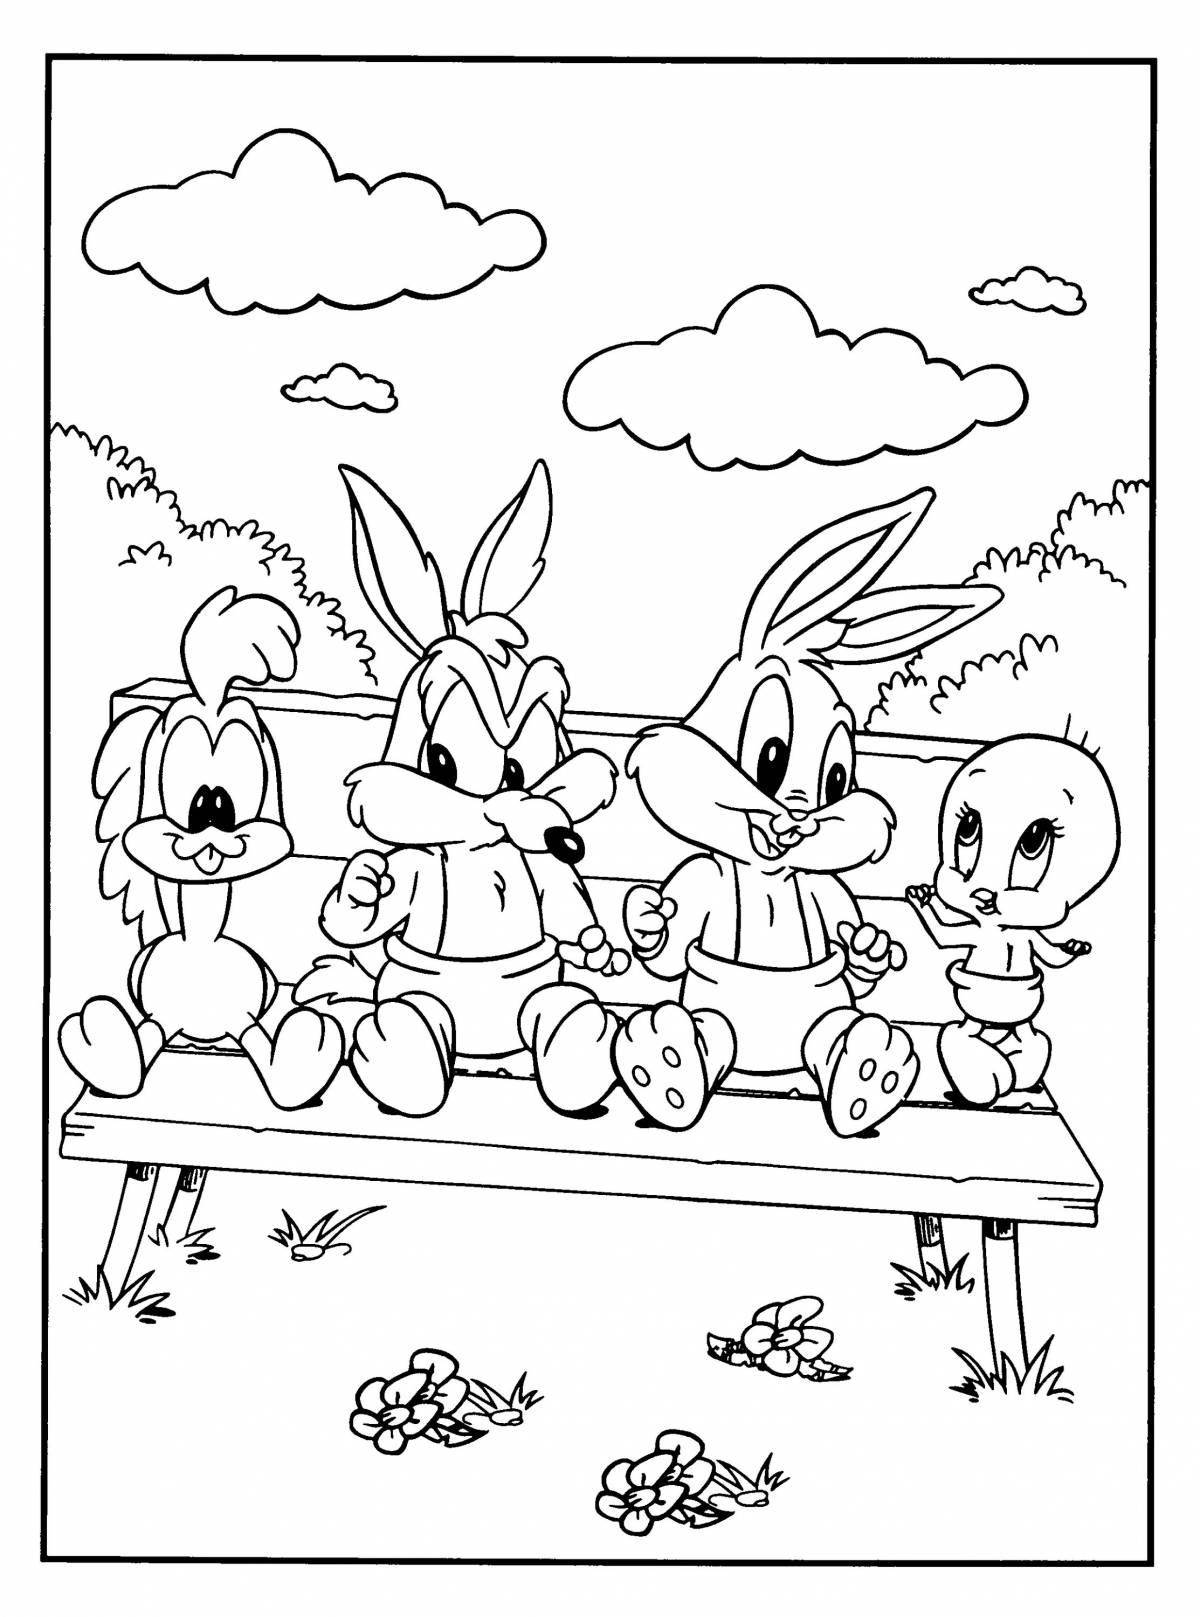 Tiny bunny coloring page